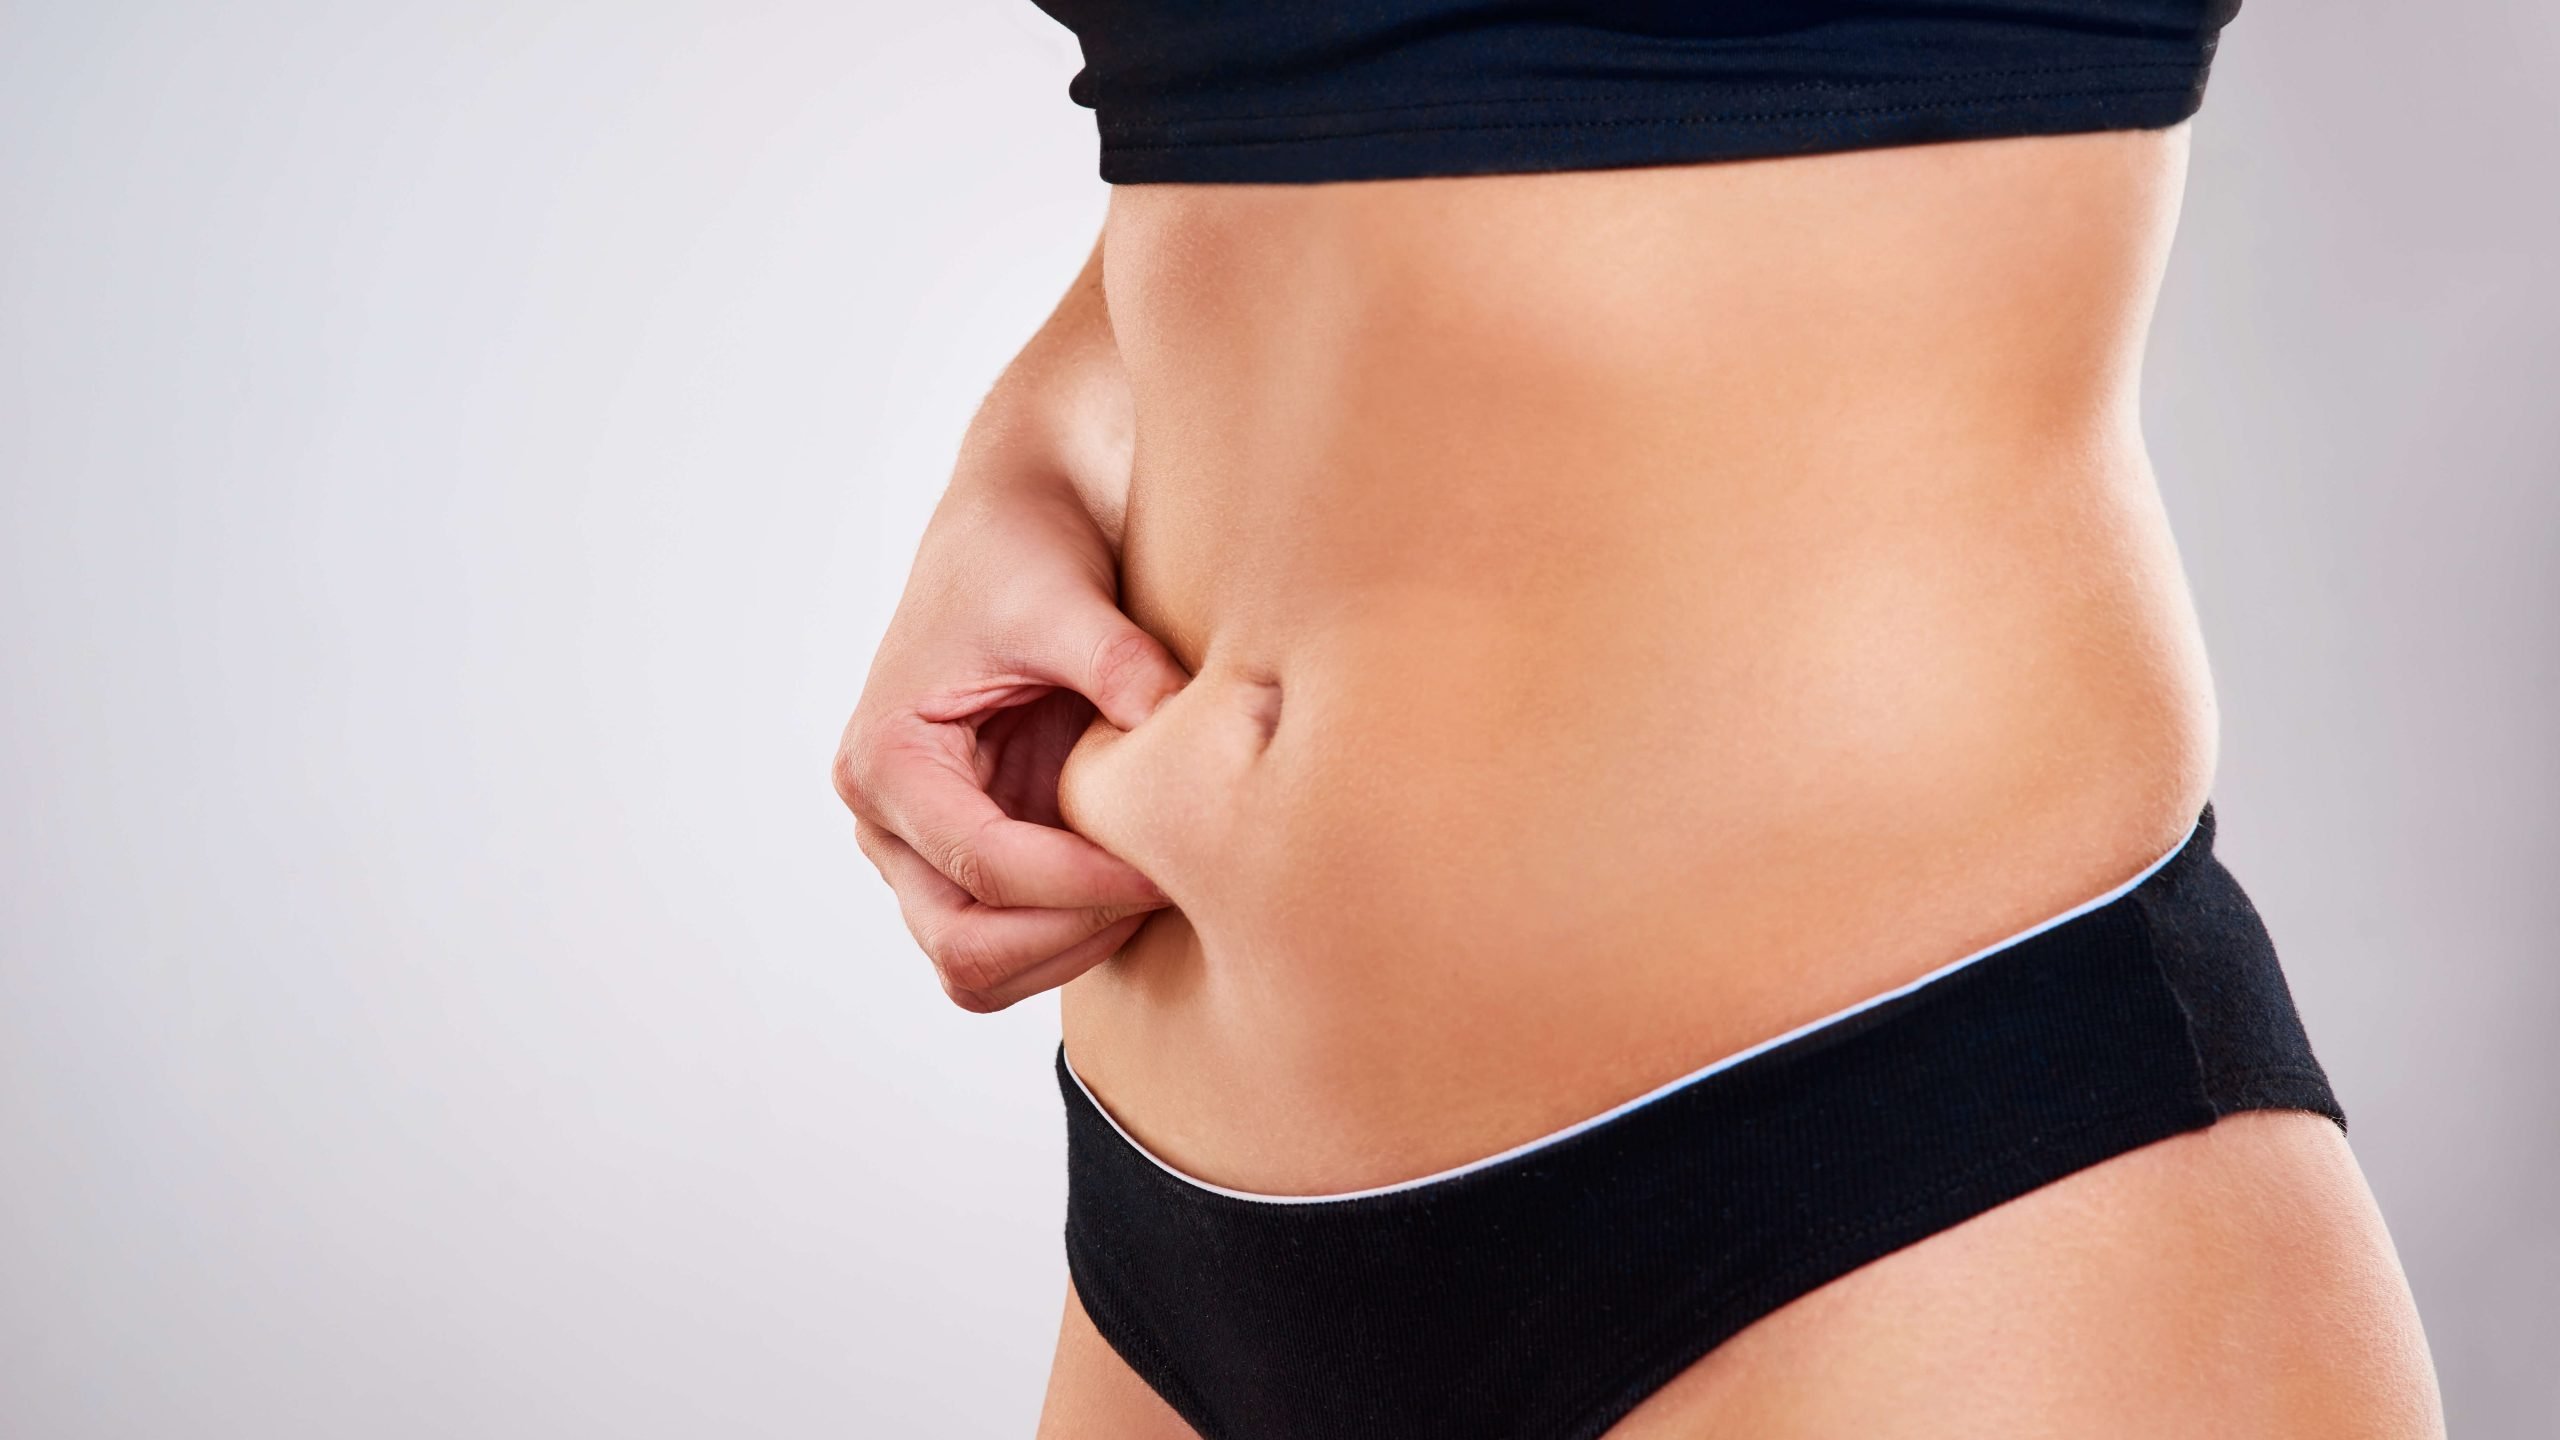 How Much Fat Is Needed for Laser Liposuction and Fat Transfer